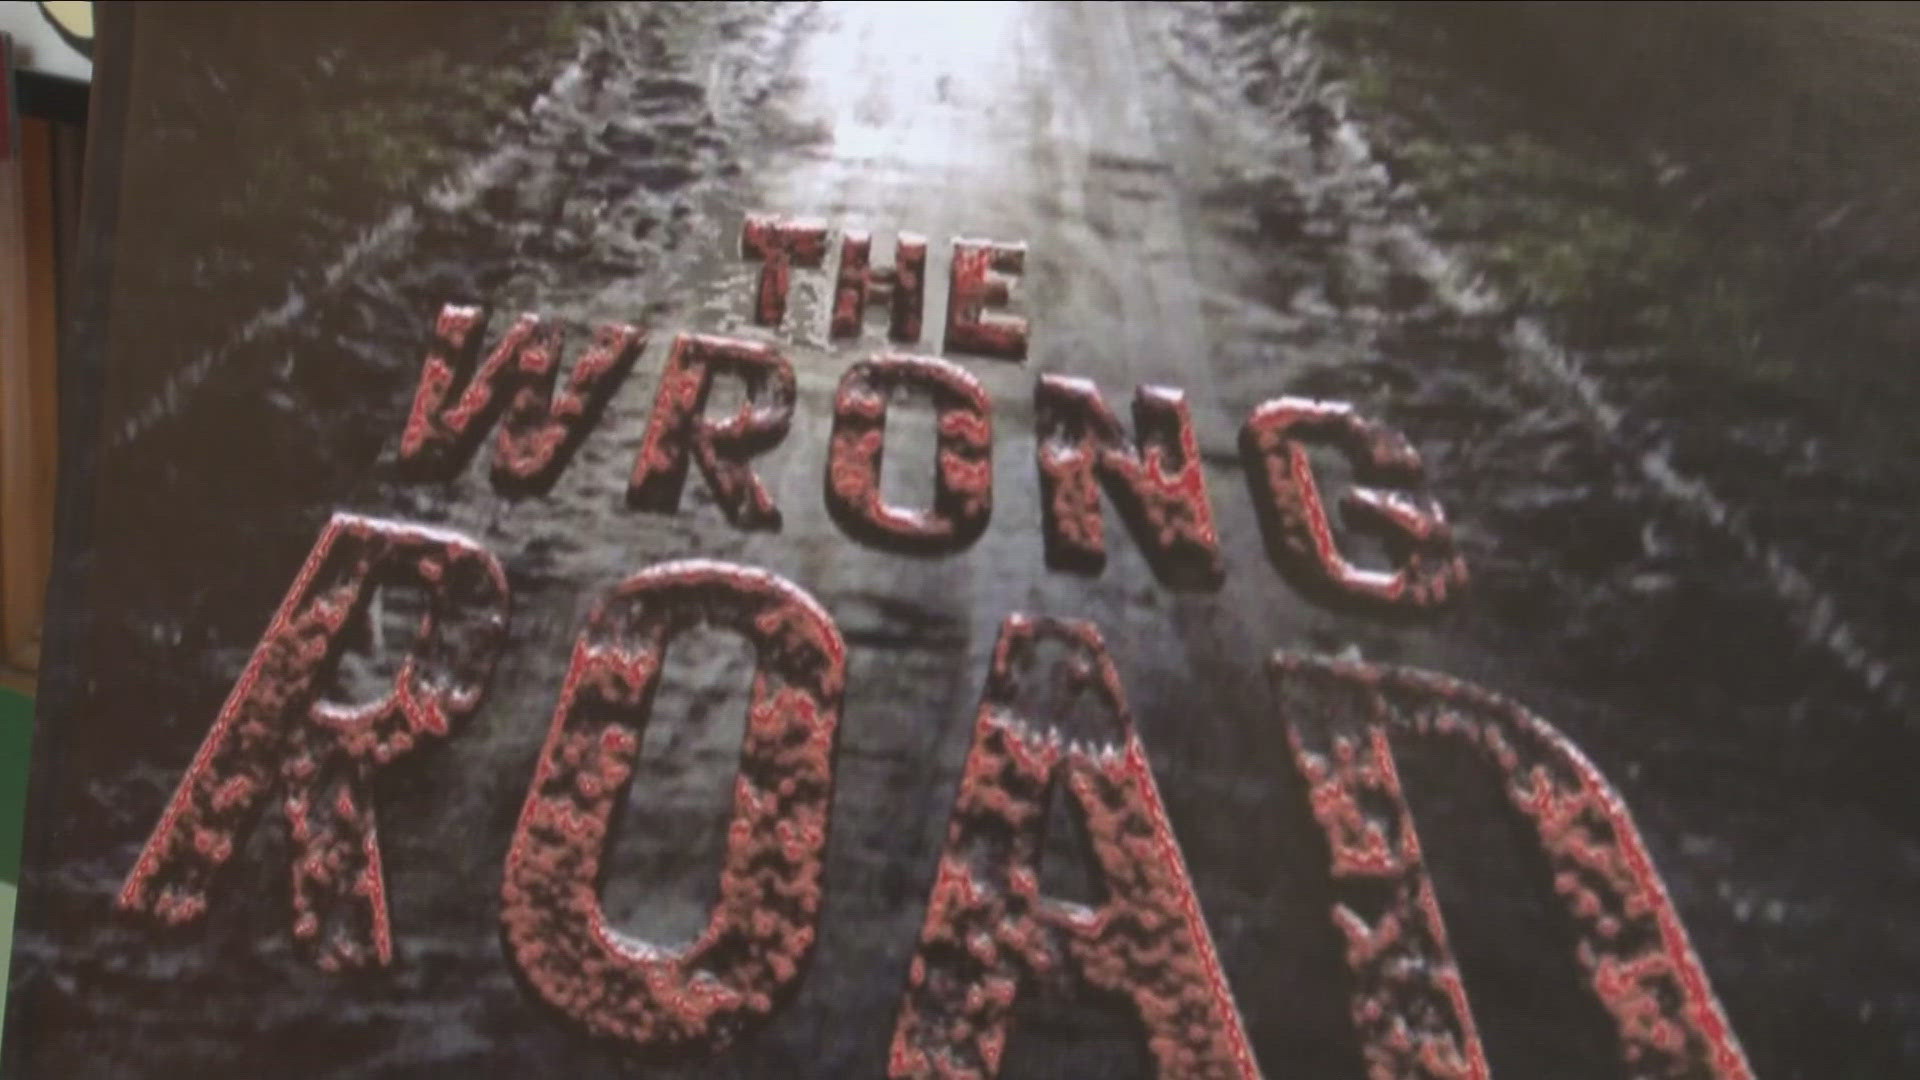 Hundreds of people attended the premiere of "The Wrong Road" on Sunday at North Park Theatre on Hertel Avenue.